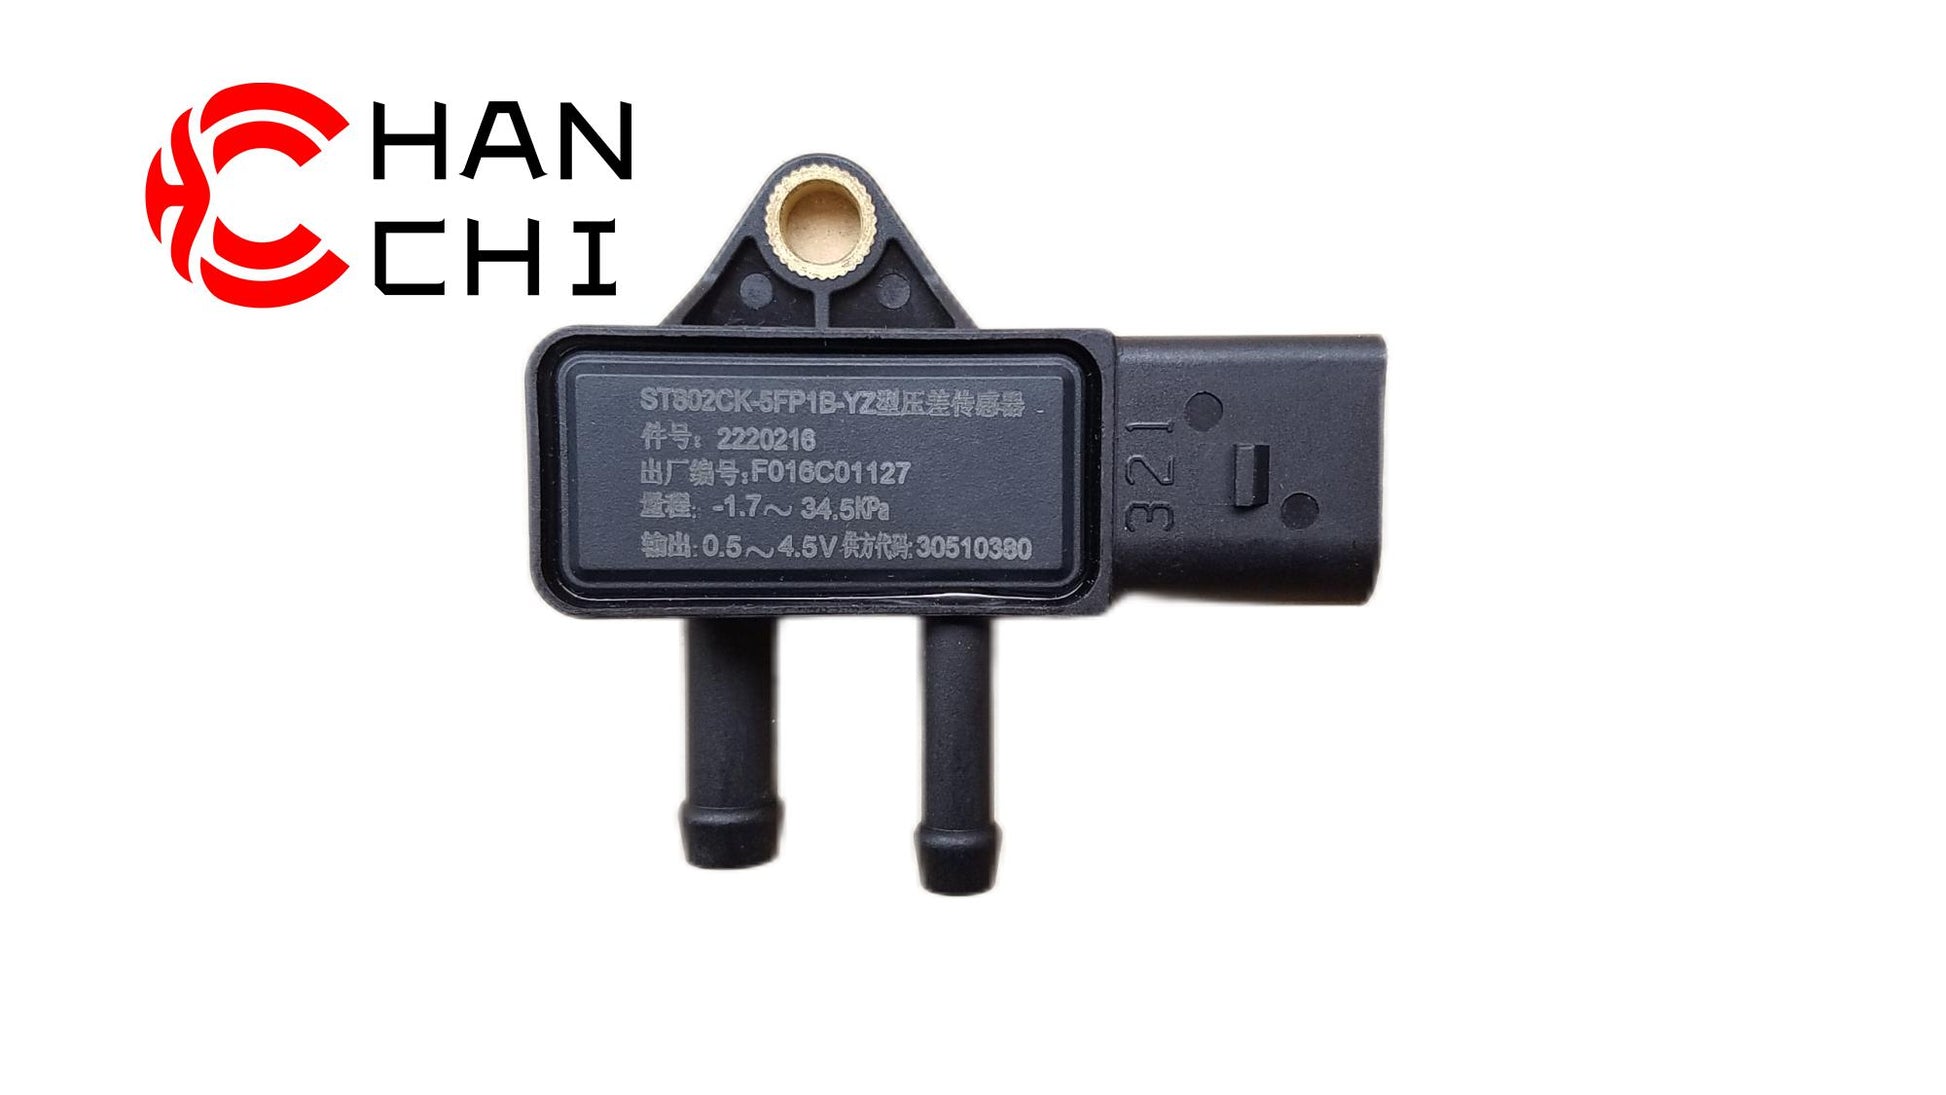 OEM: 2220216 610800190624 ST802CK-5FP1B-YZMaterial: ABSColor: blackOrigin: Made in ChinaWeight: 100gPacking List: 1* Diesel Particulate Filter Differential Pressure Sensor More ServiceWe can provide OEM Manufacturing serviceWe can Be your one-step solution for Auto PartsWe can provide technical scheme for you Feel Free to Contact Us, We will get back to you as soon as possible.